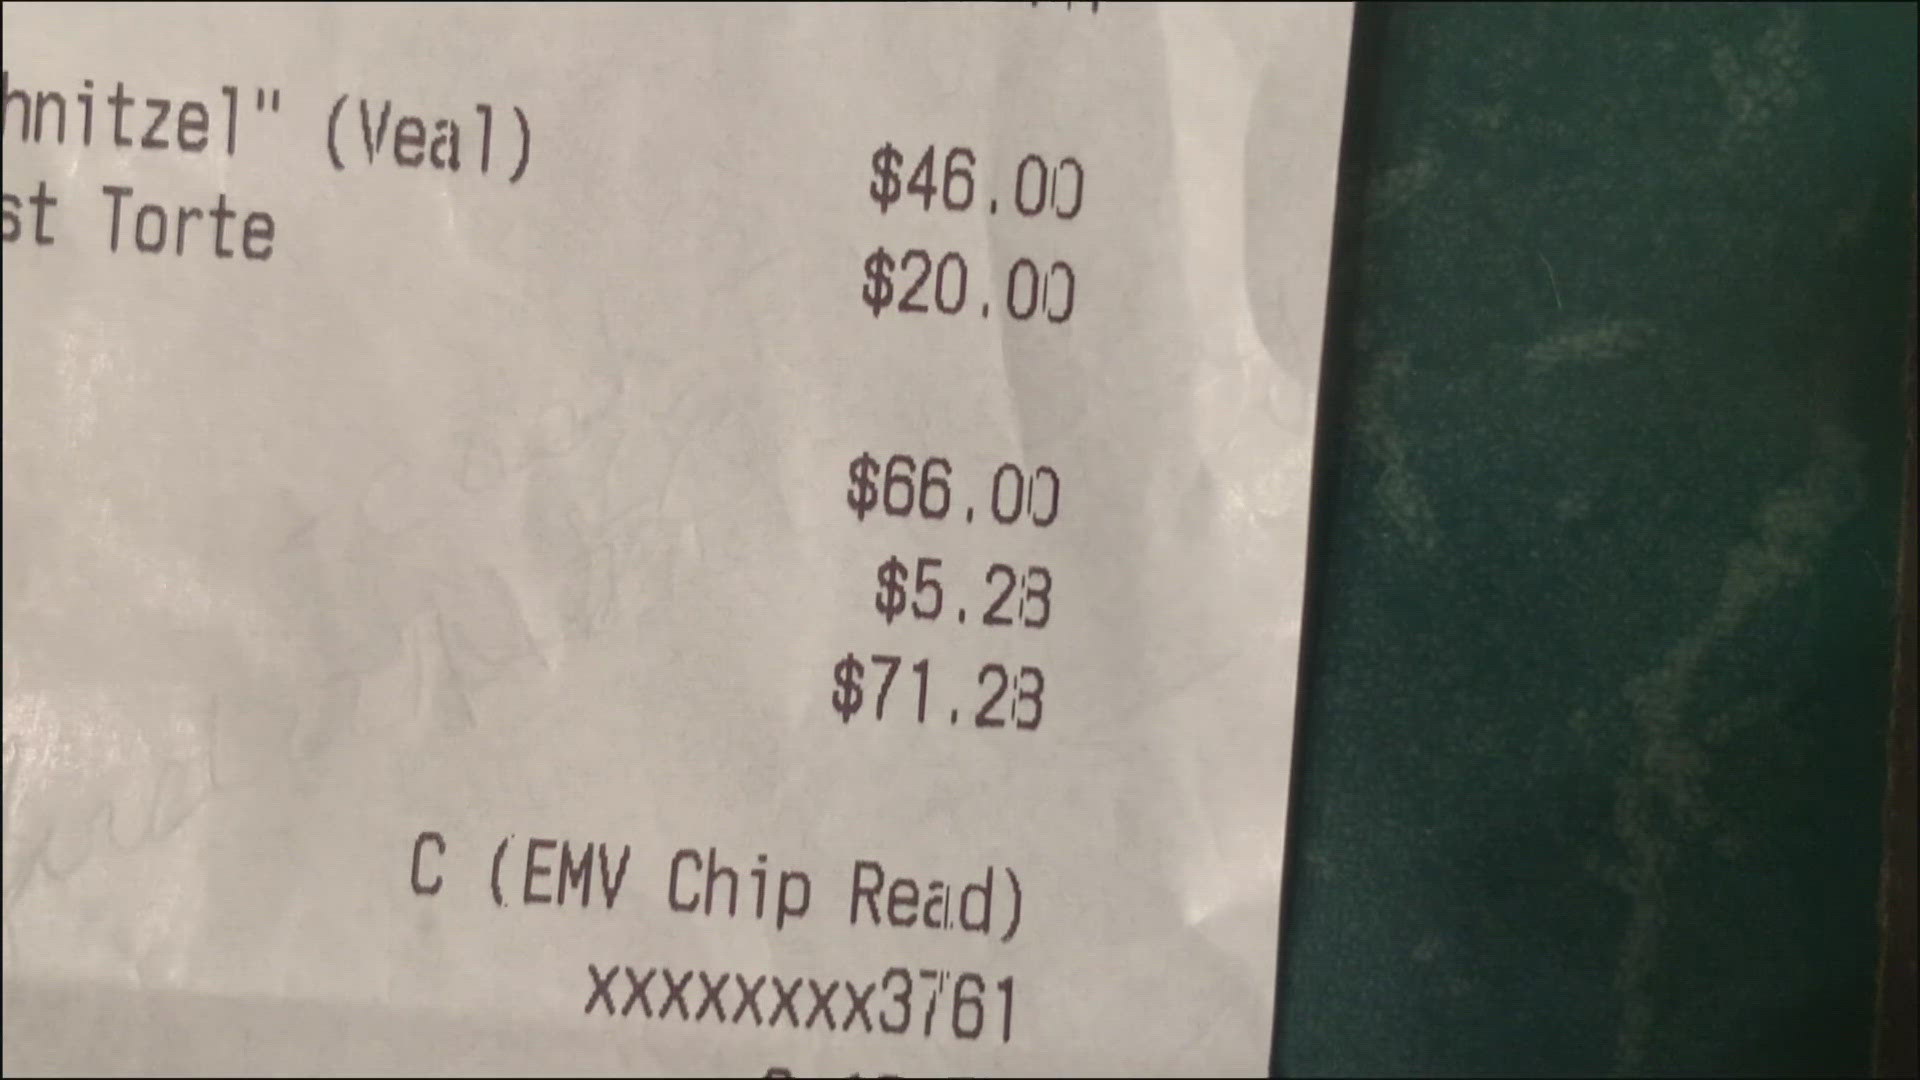 Customers and businesses alike are adjusting to the holiday's new guidelines. One Parma restaurant claims it didn't know it wasn't supposed to be charging sales tax.